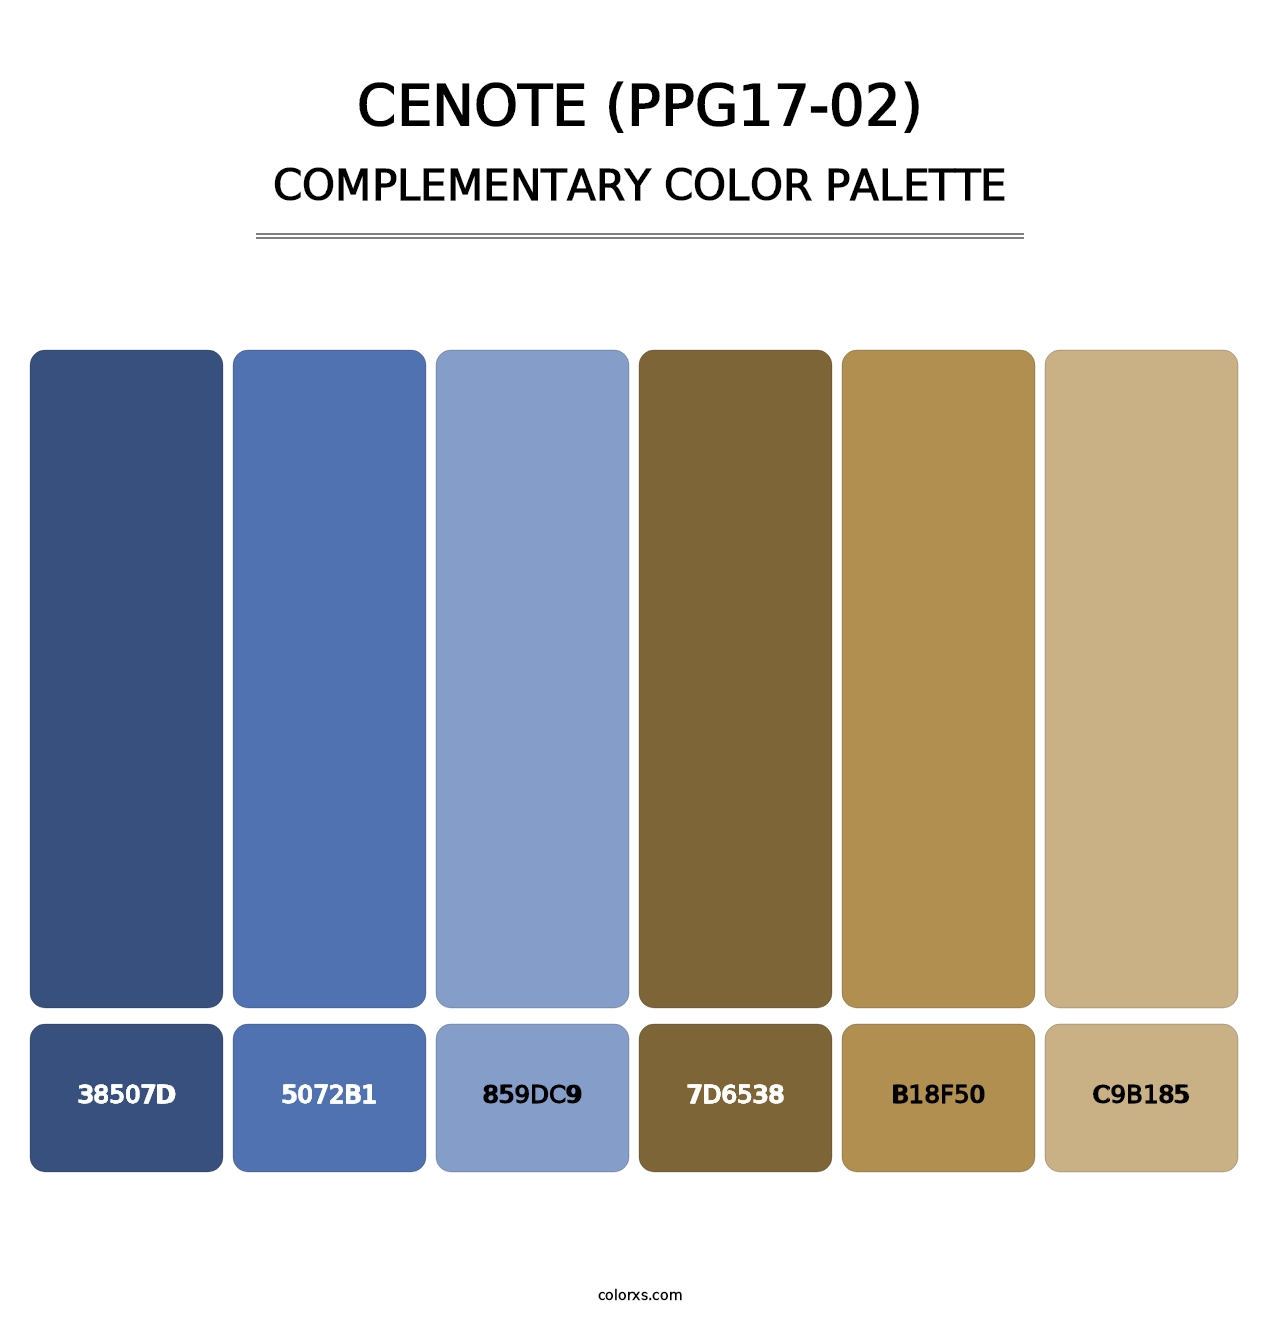 Cenote (PPG17-02) - Complementary Color Palette